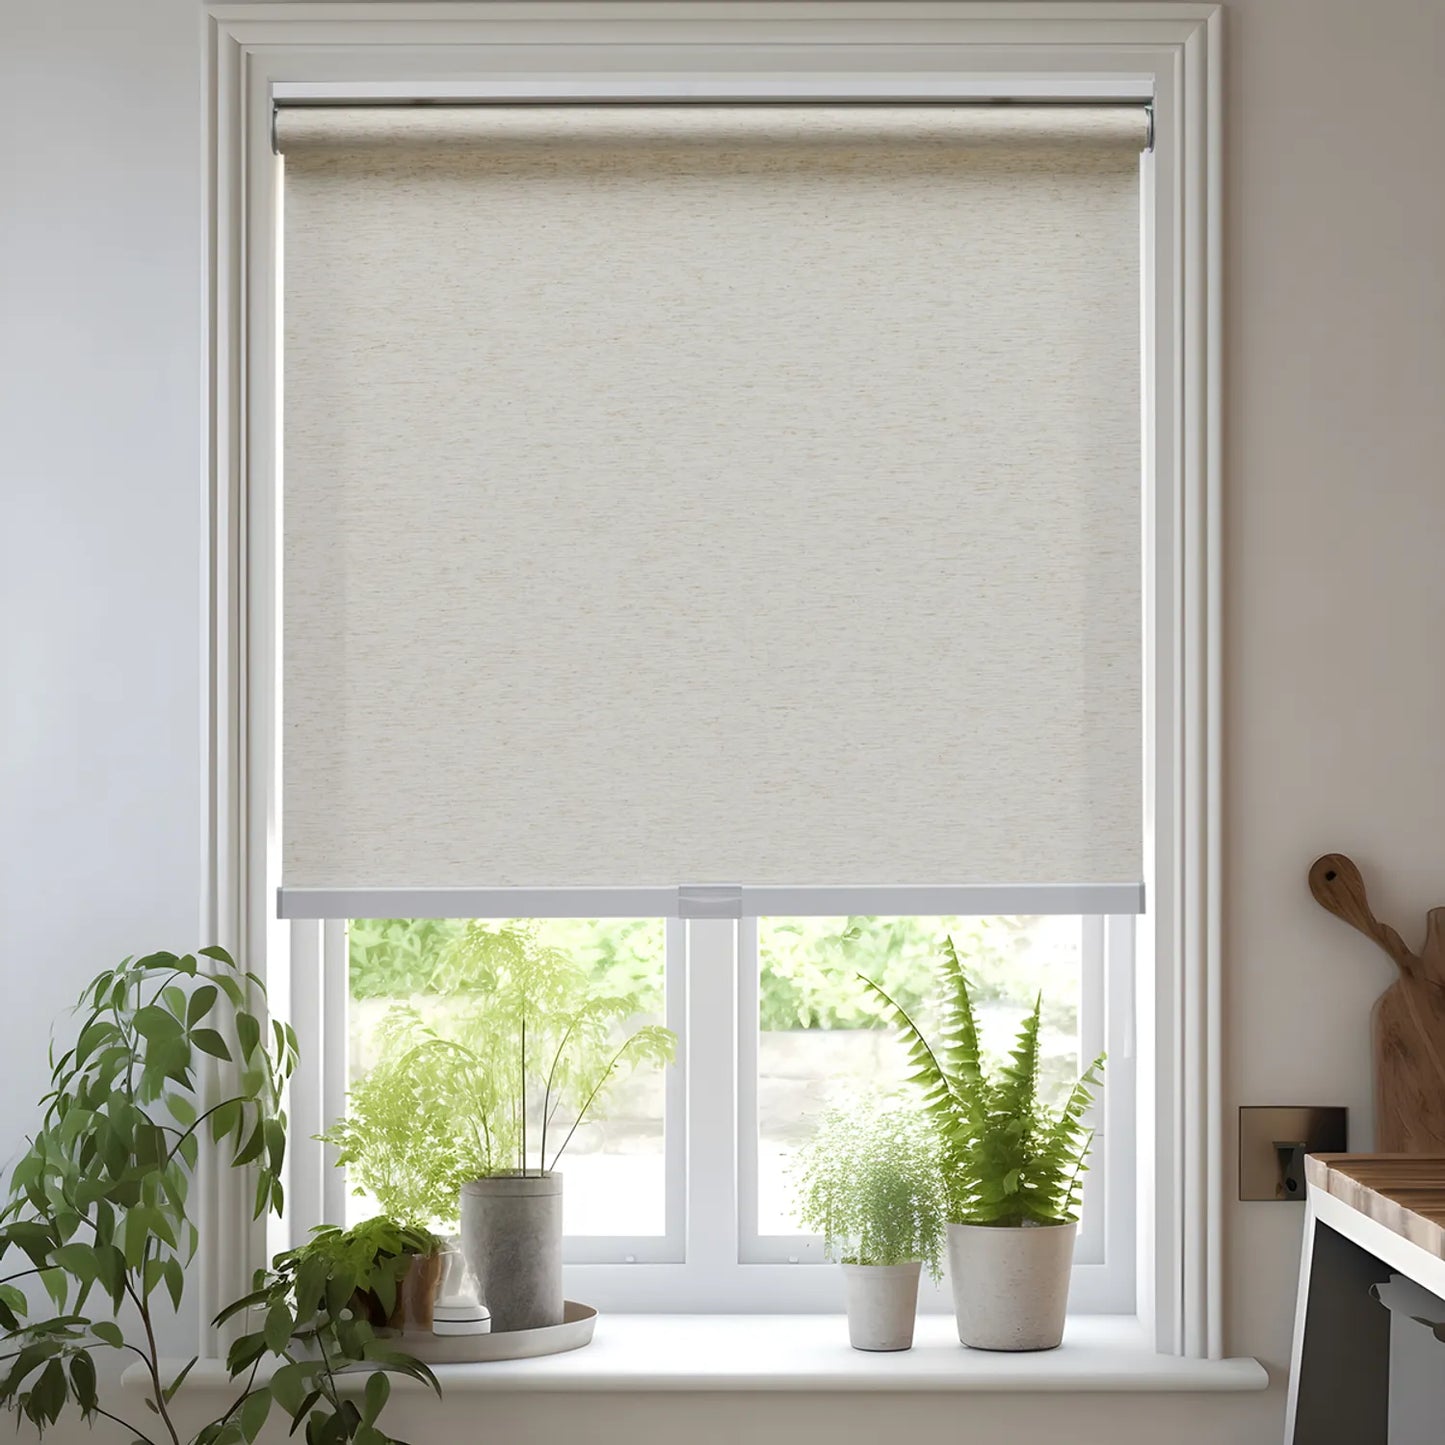 EaseEase Blackout Shades: UV Protection, Noise Reduction, and Heat Insulation